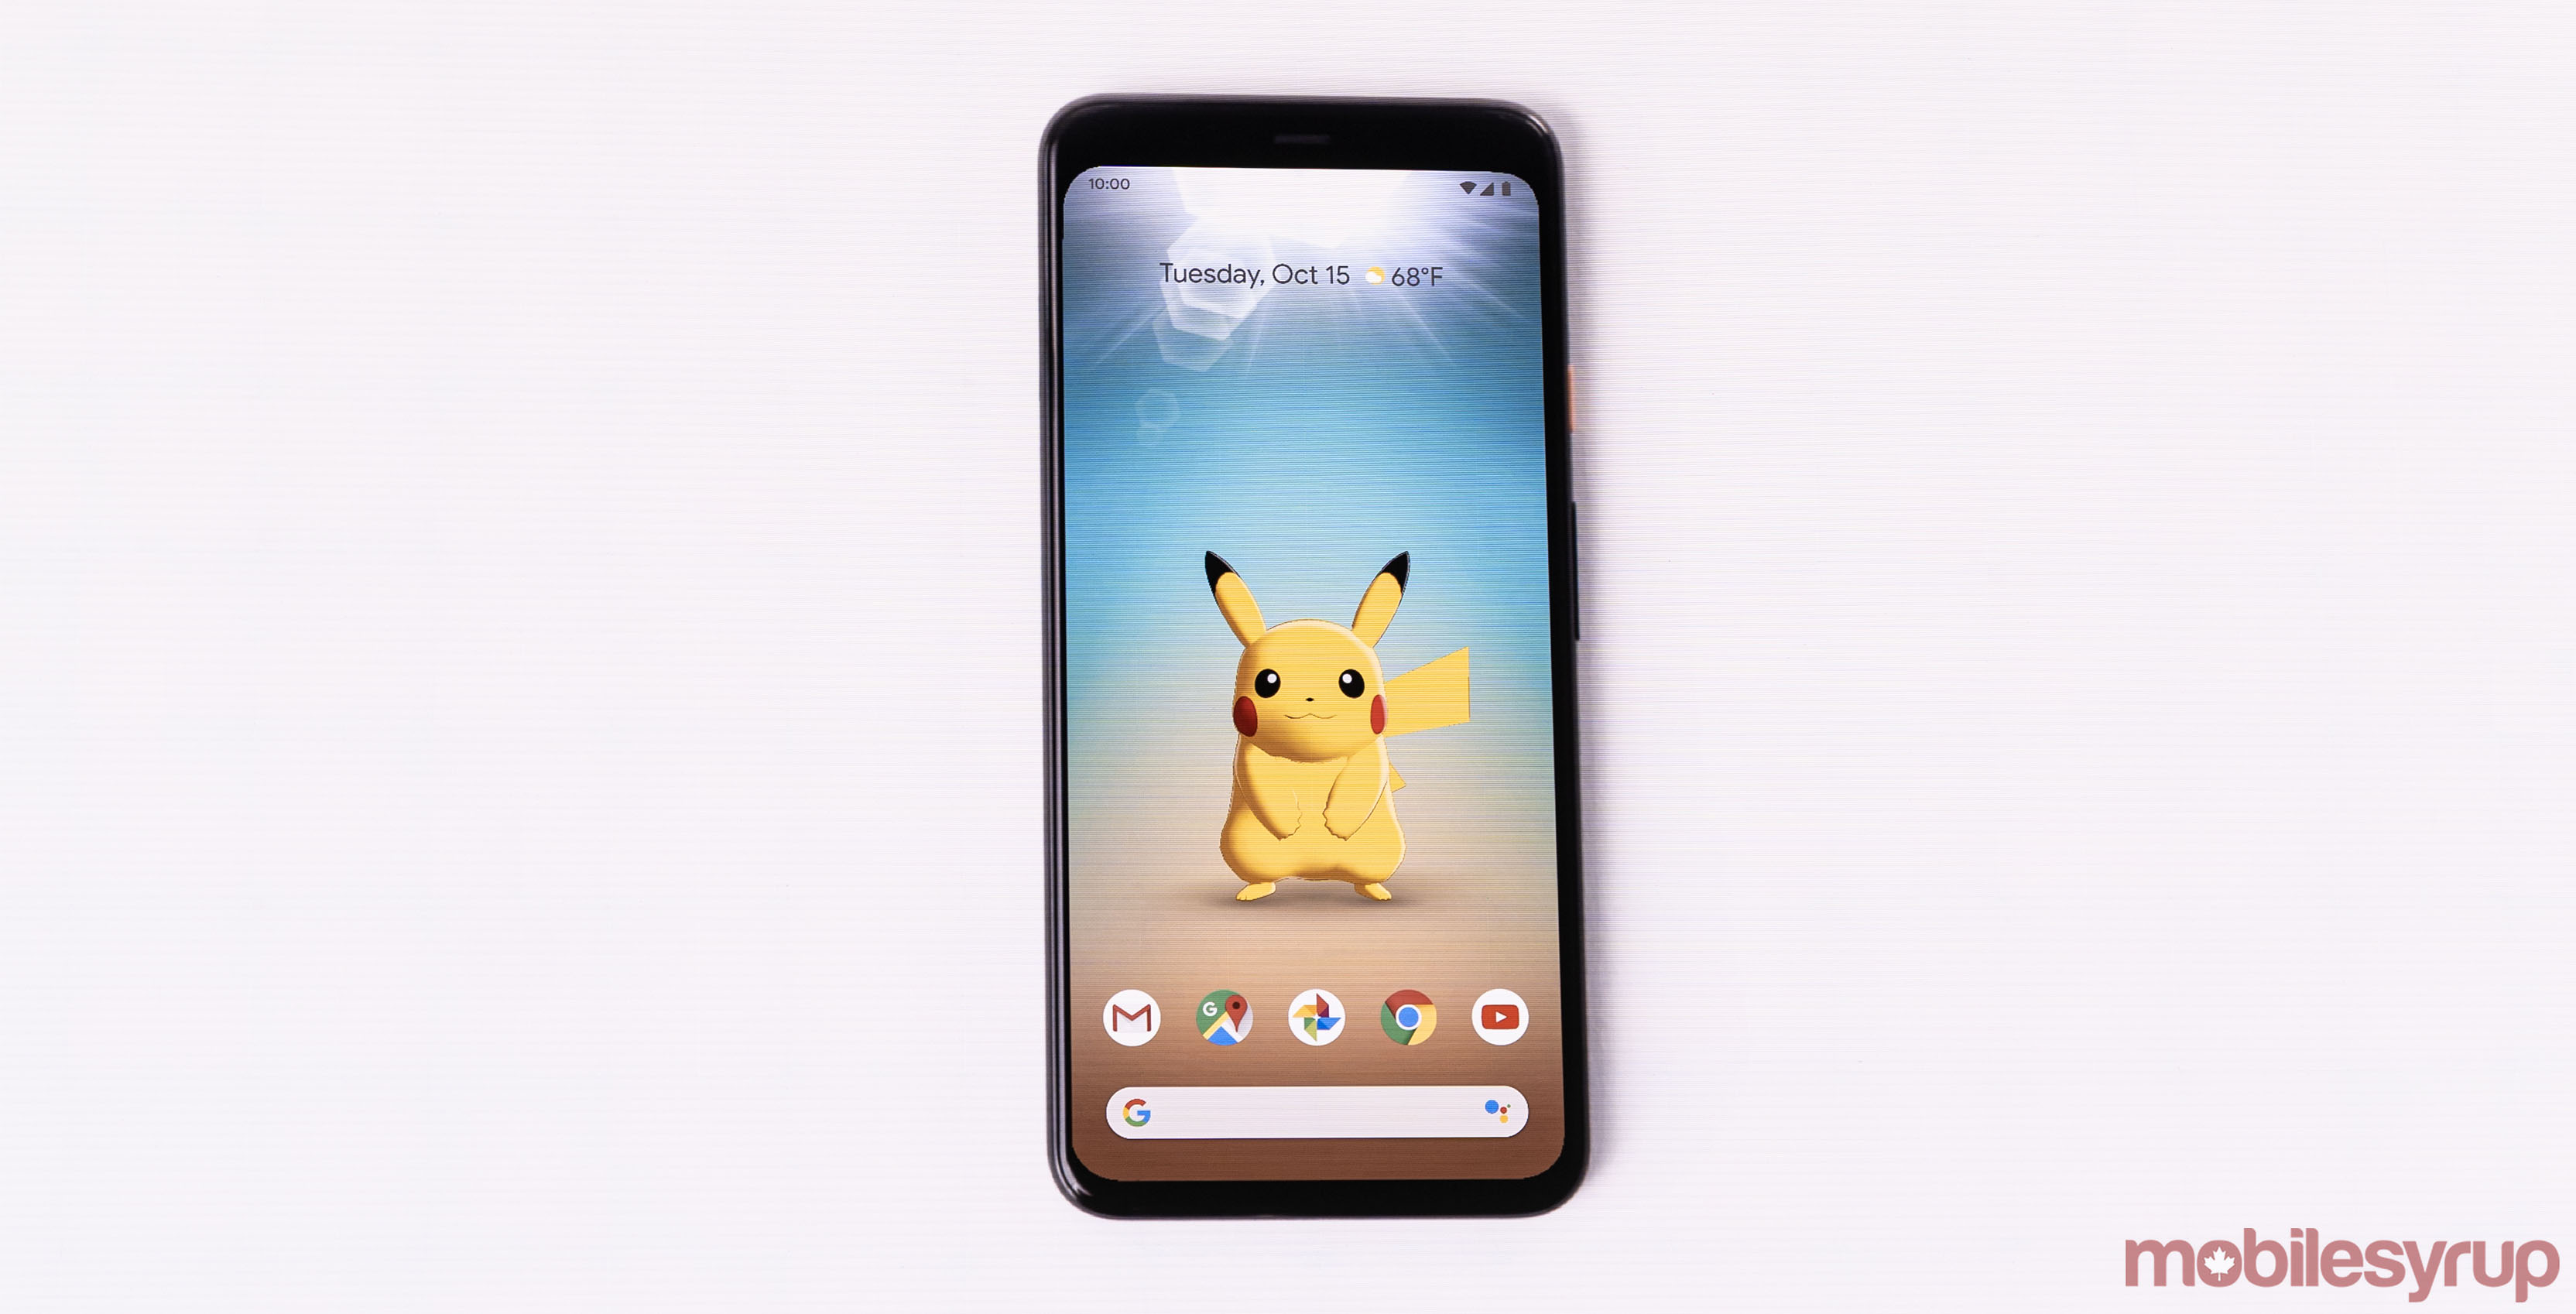 Pokémon Wave Hello and live wallpaper launches with Pixel 4